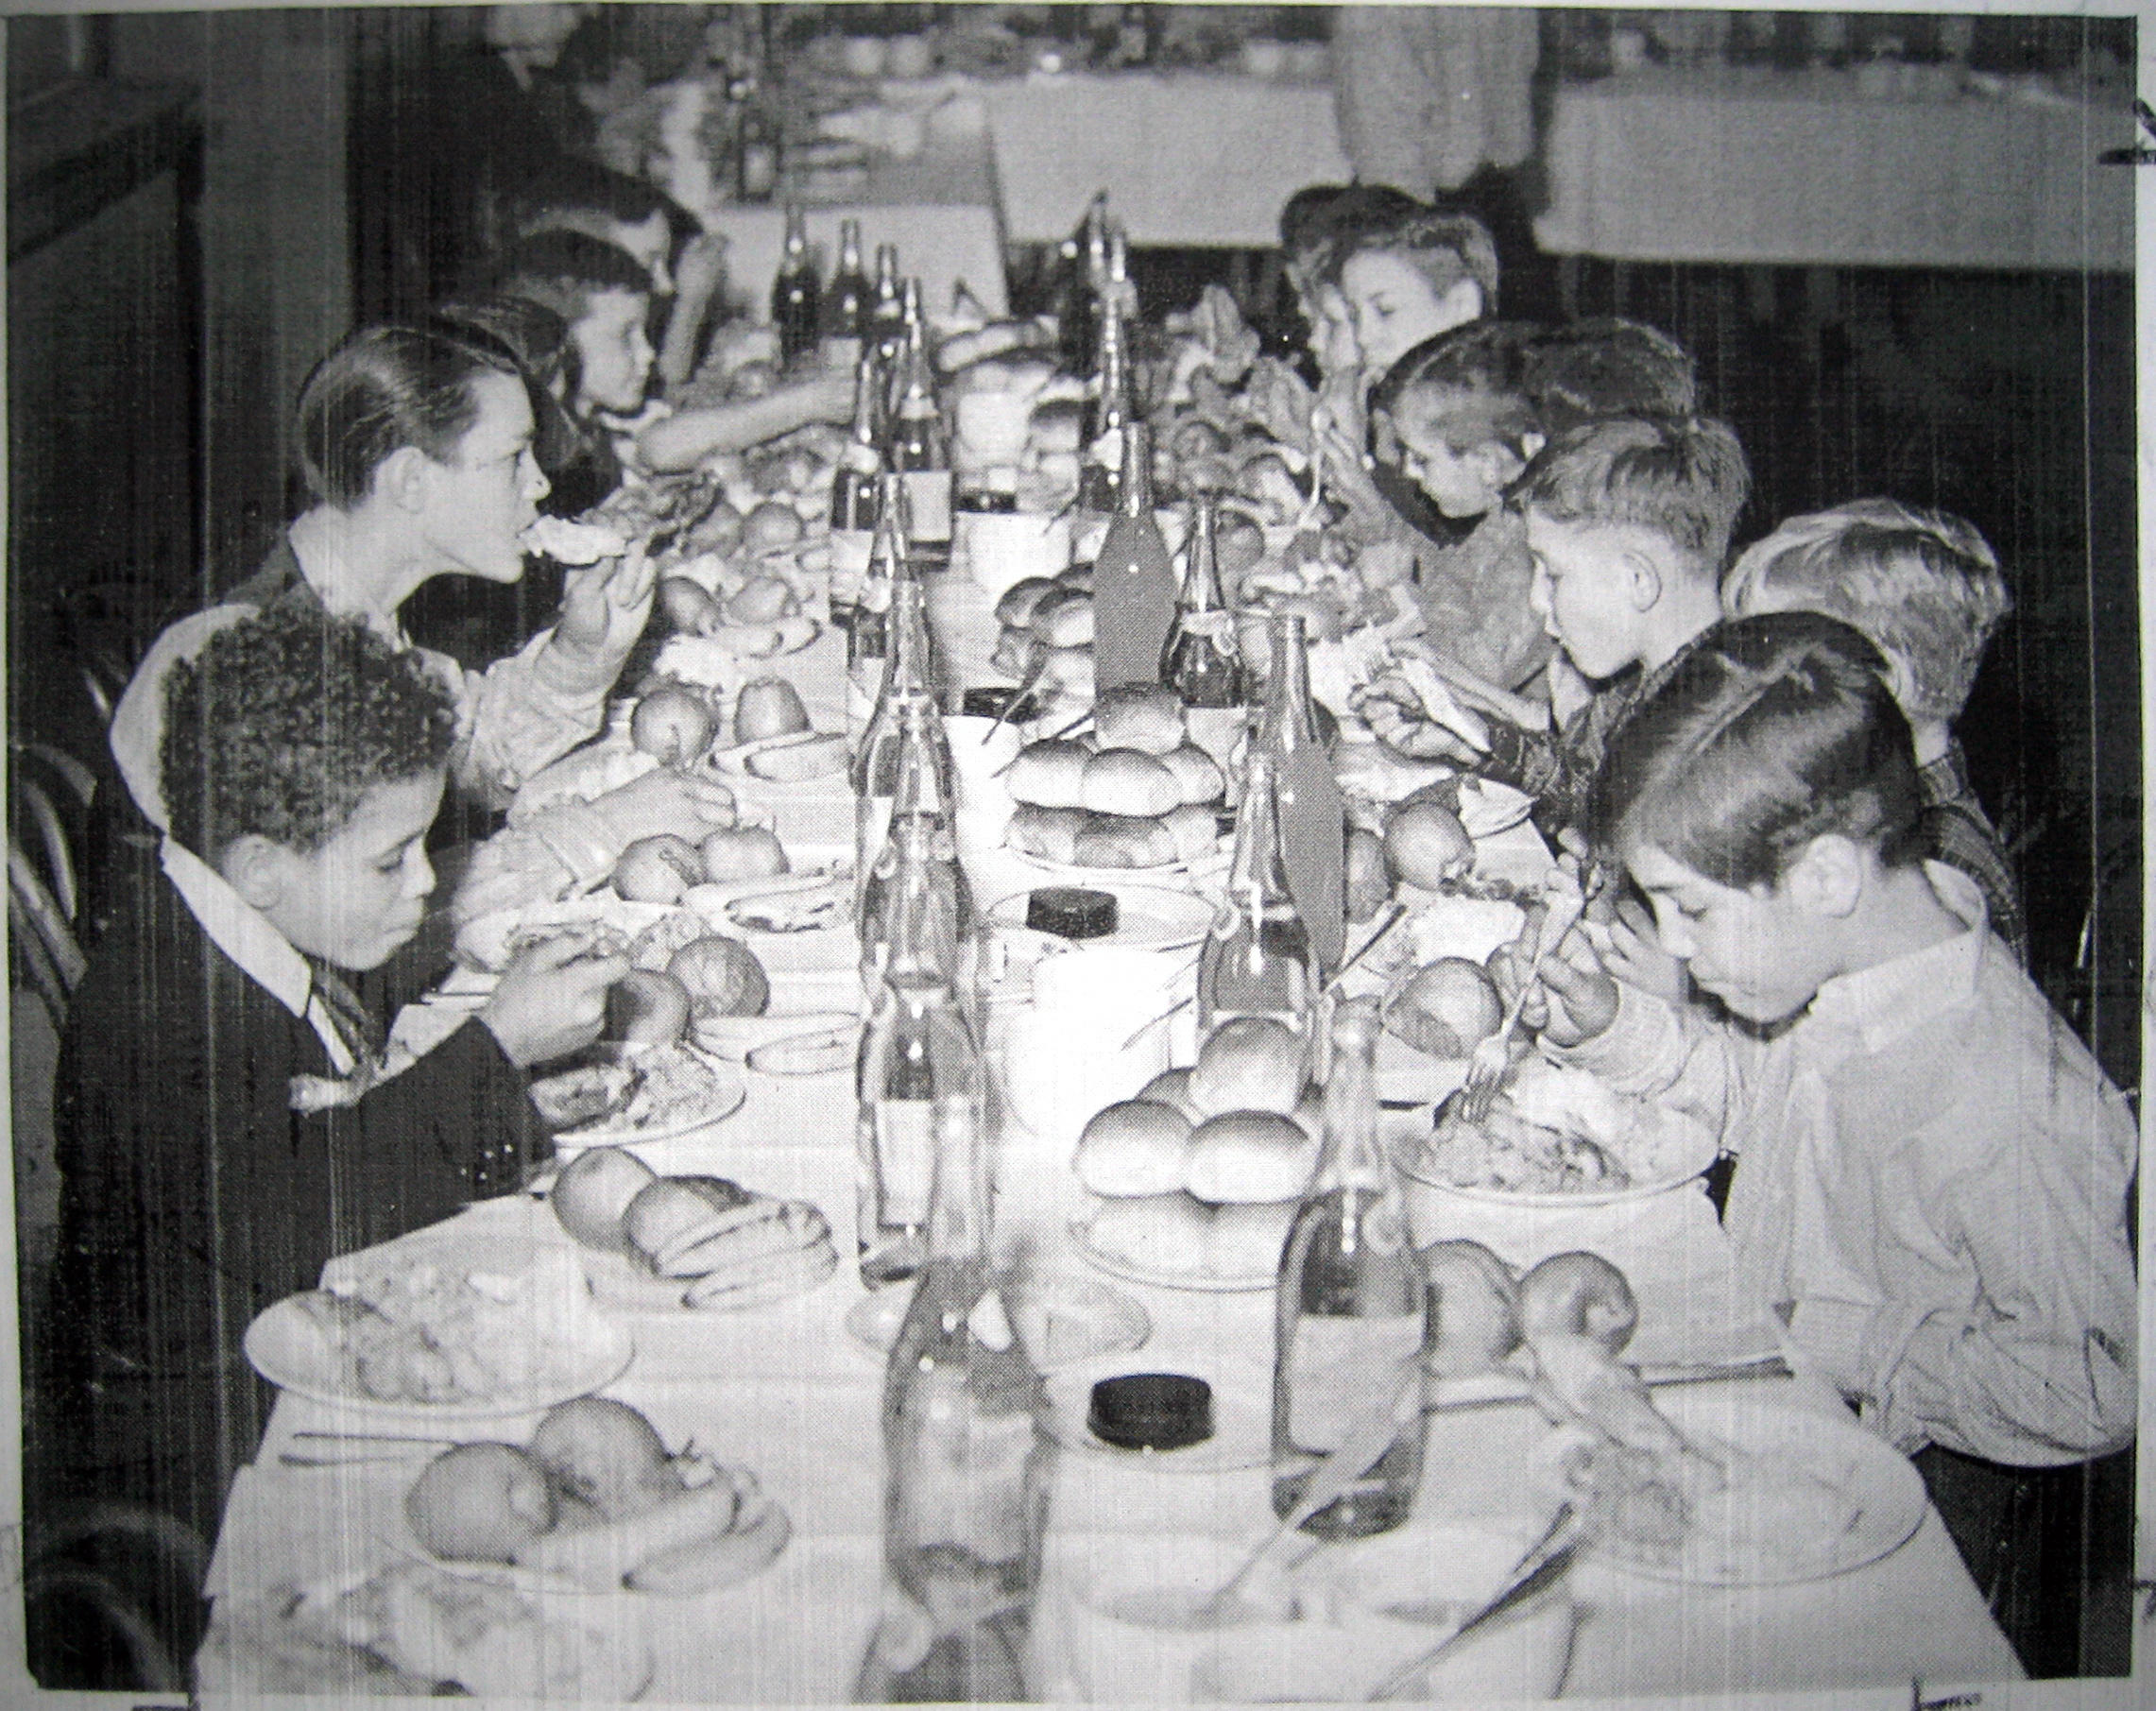 From 1906-1931, a mysterious benefactor served Thanksgiving dinner to orphans in St. Louis | St ...